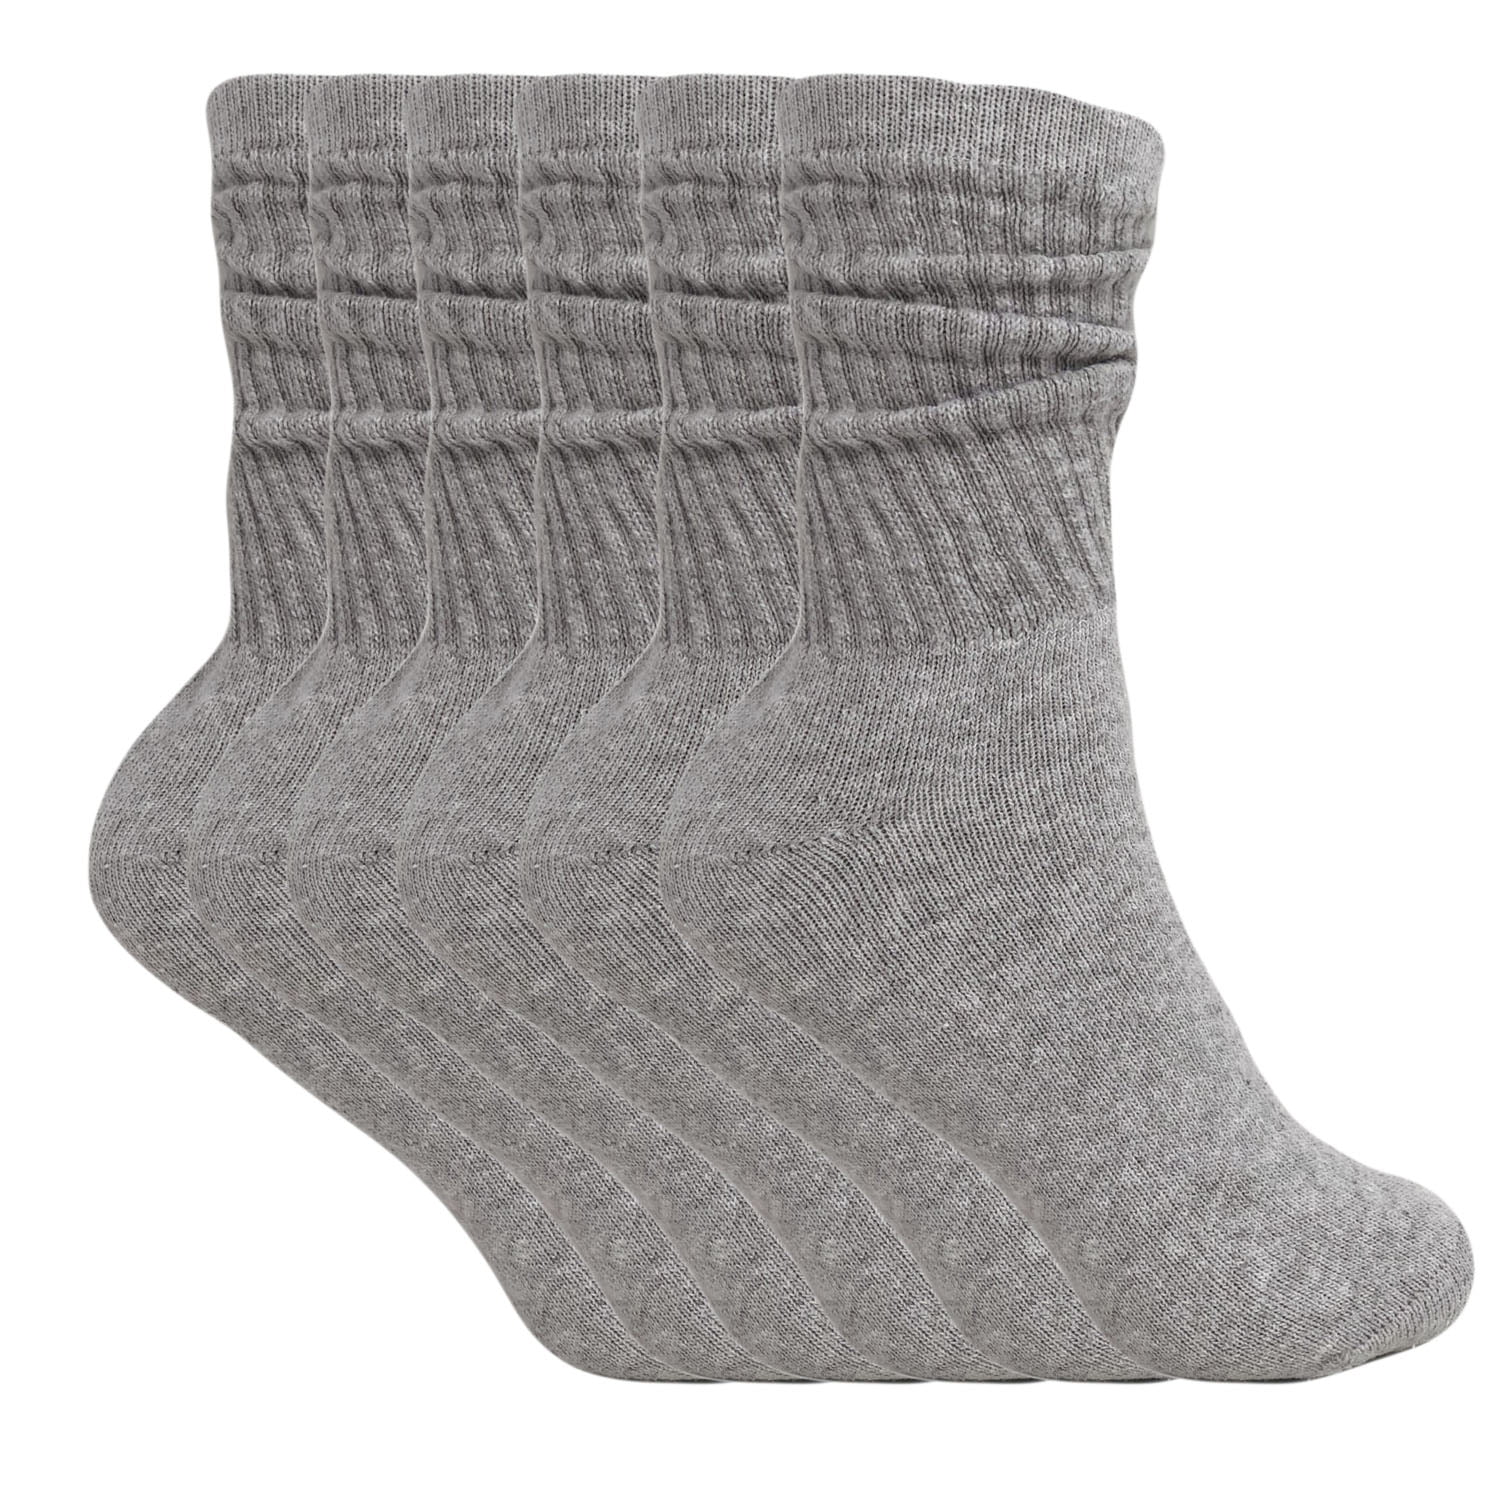 AWS/American Made - Cotton Crew Socks for Women Gray Made in USA 6 ...